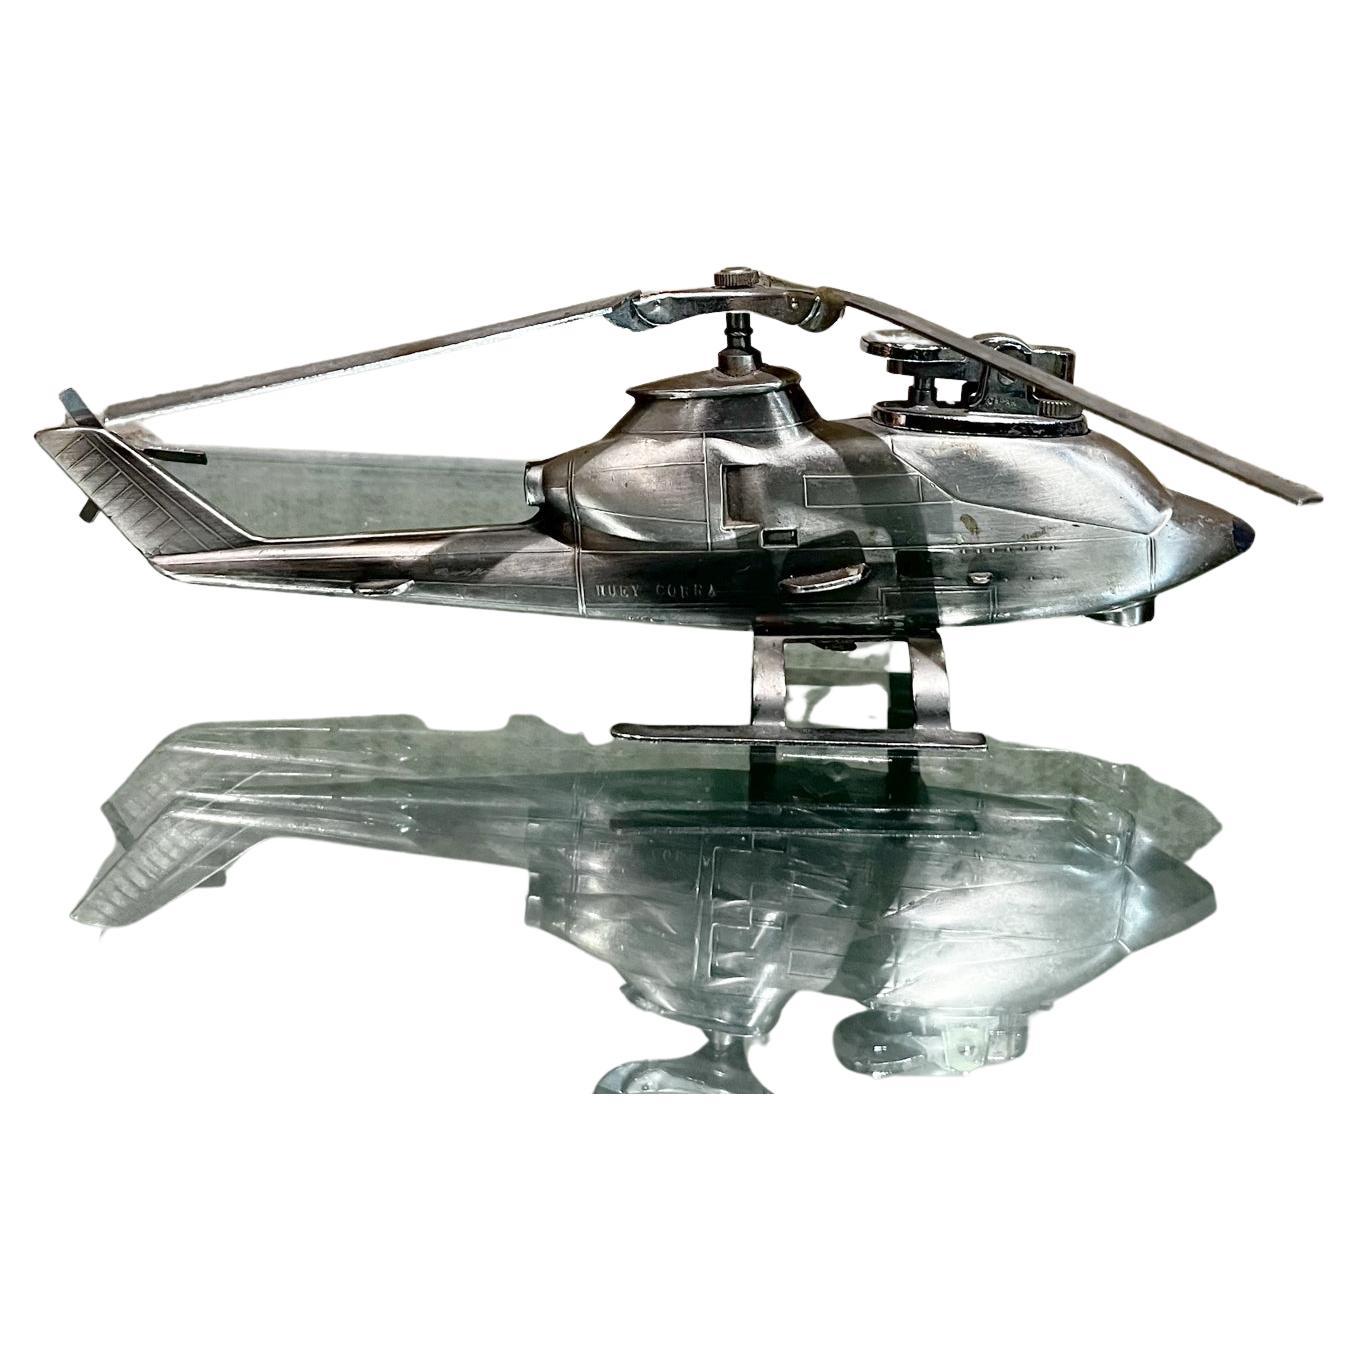 1980s Table Lighter Chrome Plated Huey Cobra Helicopter Japan For Sale